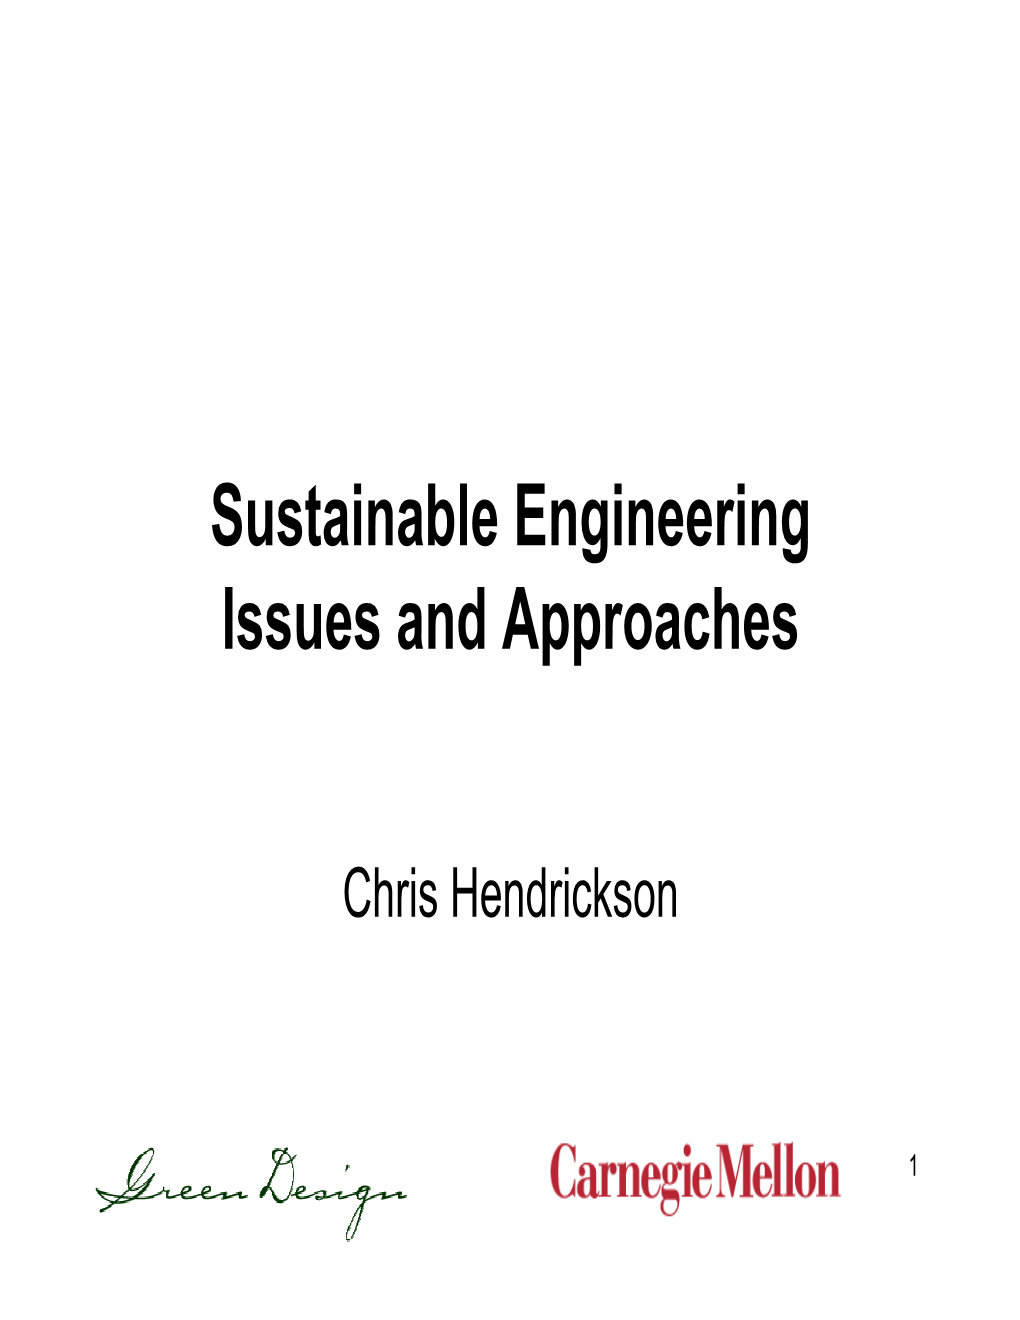 Sustainable Engineering Issues and Approaches